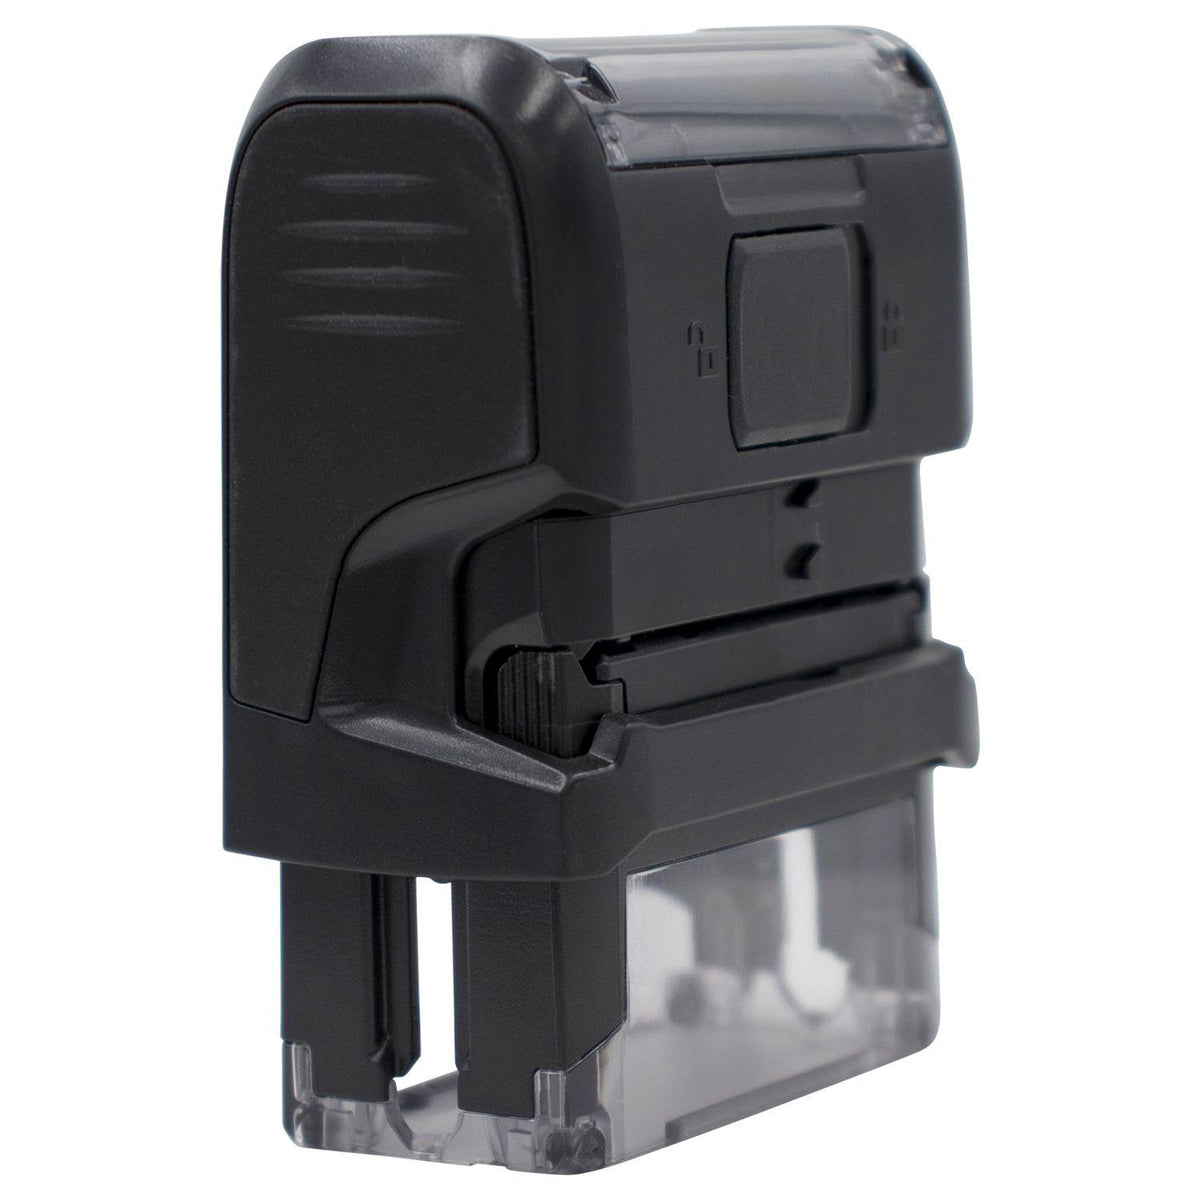 Large Self-Inking Small Packet Stamp - Engineer Seal Stamps - Brand_Trodat, Impression Size_Large, Stamp Type_Self-Inking Stamp, Type of Use_Office, Type of Use_Postal &amp; Mailing